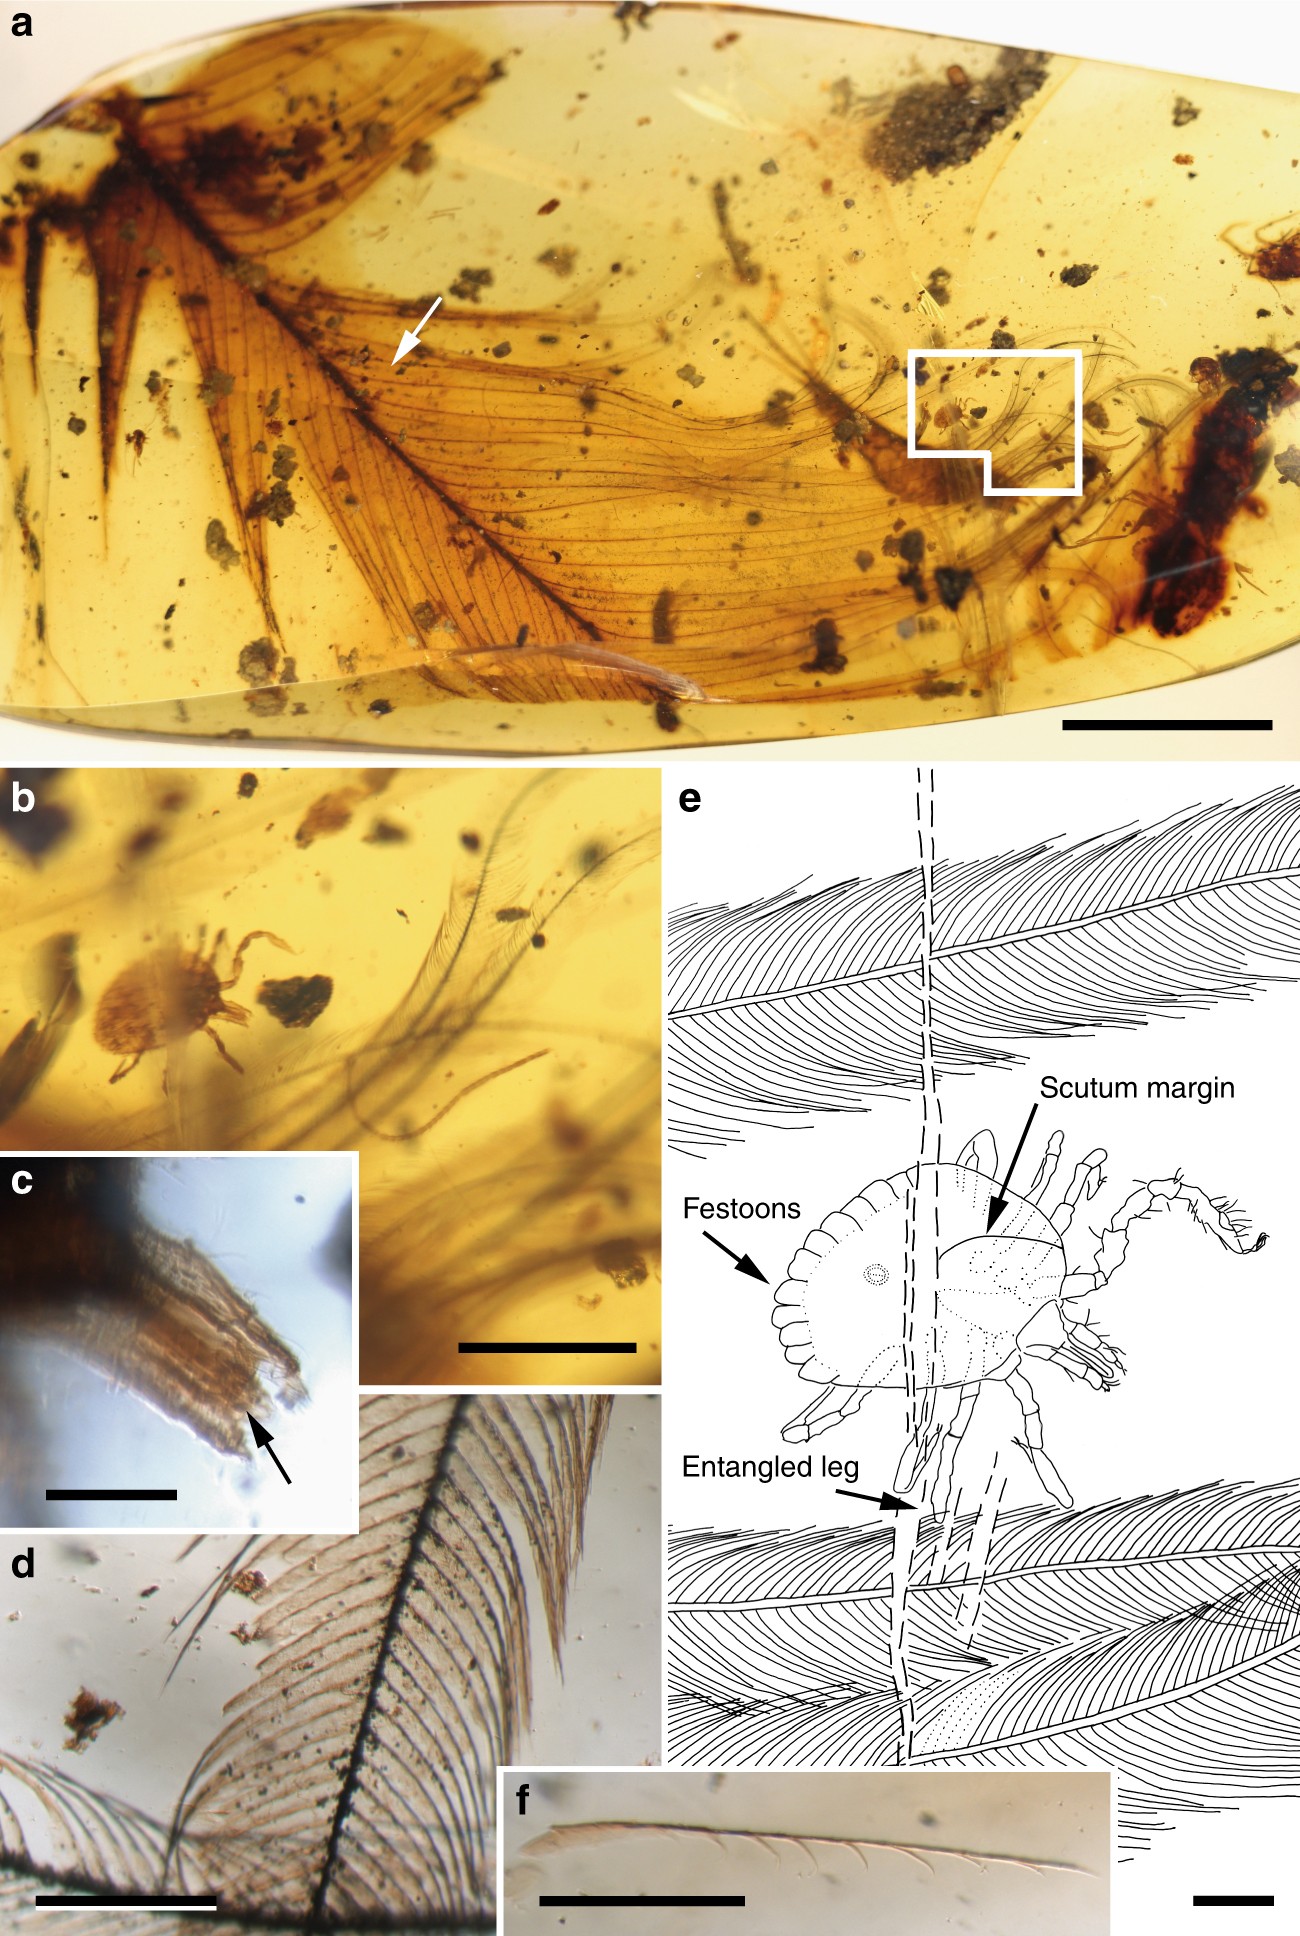 Ticks parasitised feathered dinosaurs as revealed by Cretaceous amber  assemblages | Nature Communications